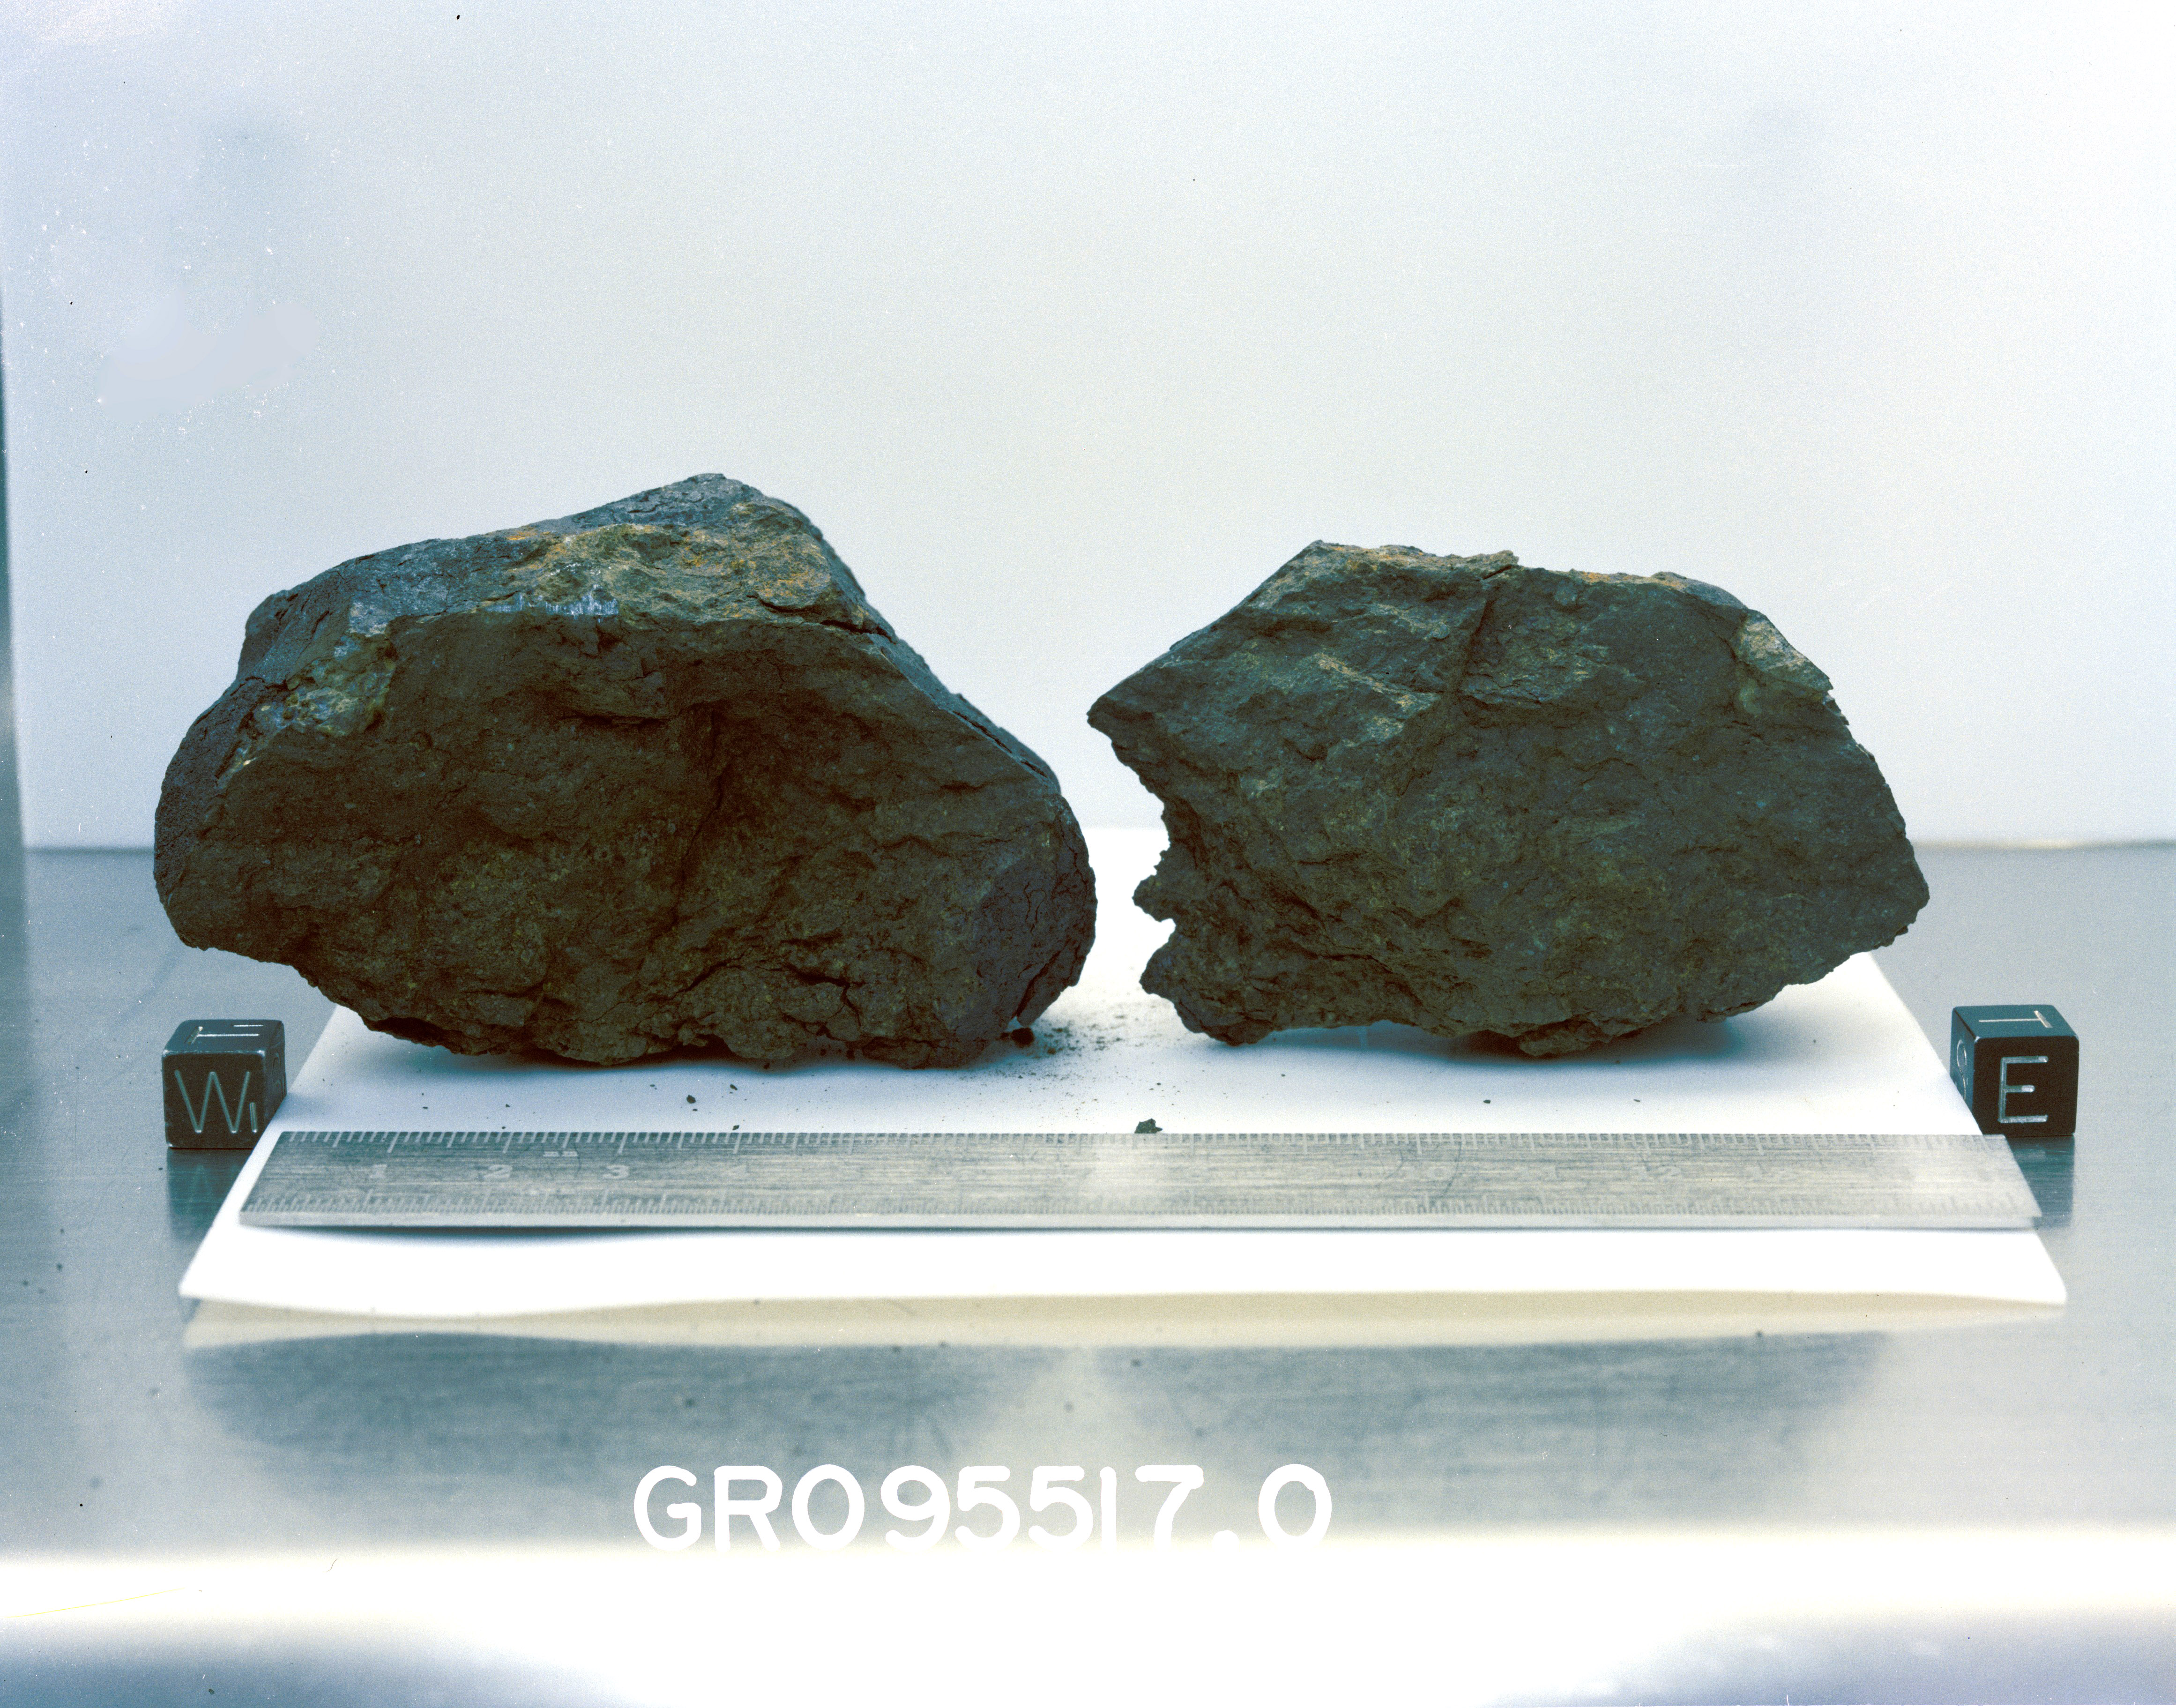 East View of Sample GRO 95517 (Photo Number: S97-00309)